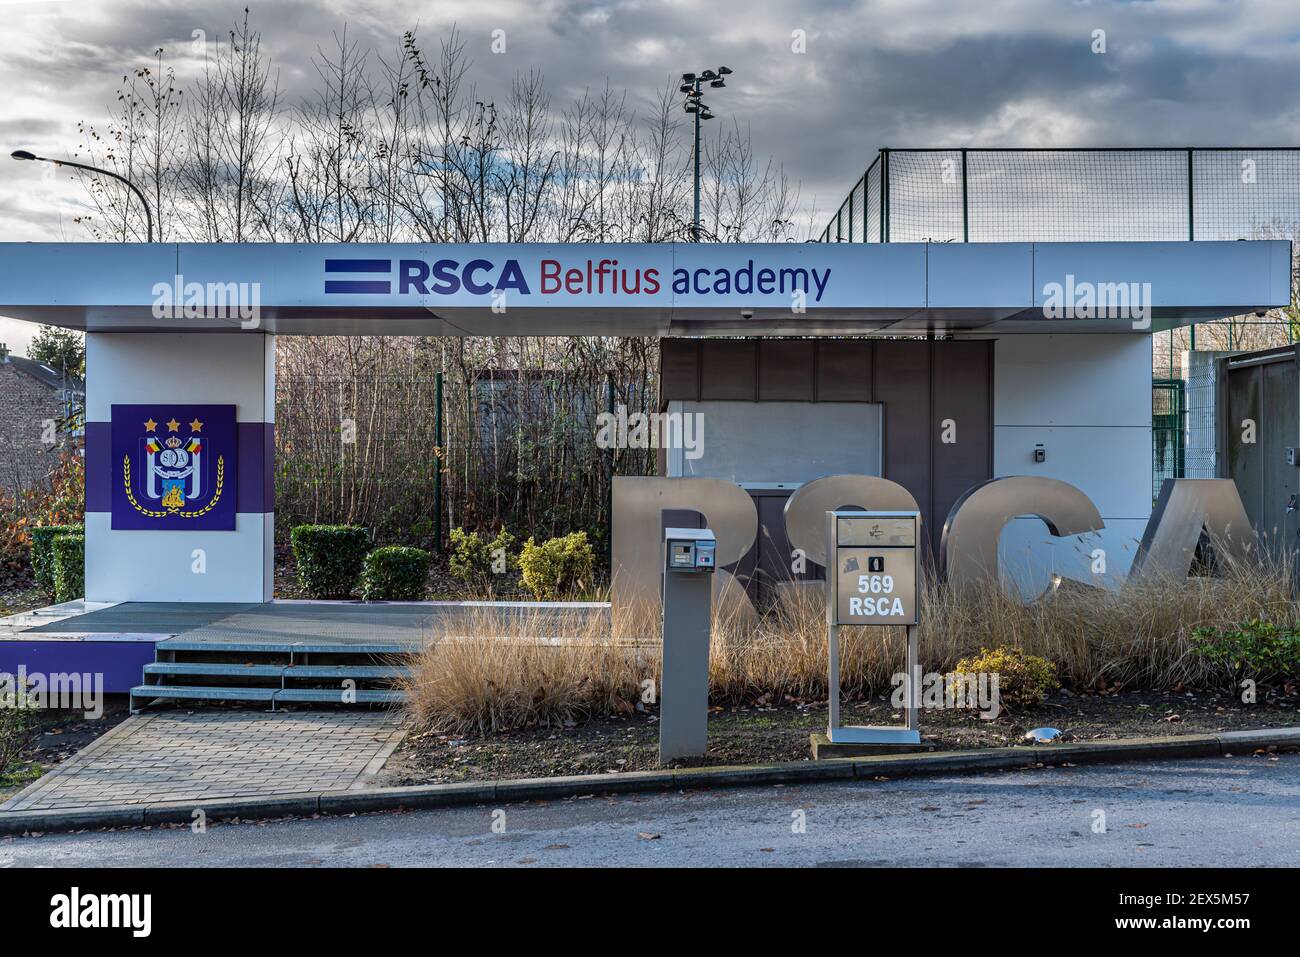 Anderlecht, Brussels Capital Region - Belgium : 12 25 2020: Entrance and sign of the Royal Sporting Club Anderlecht Belfius Academy, the soccer traini Stock Photo